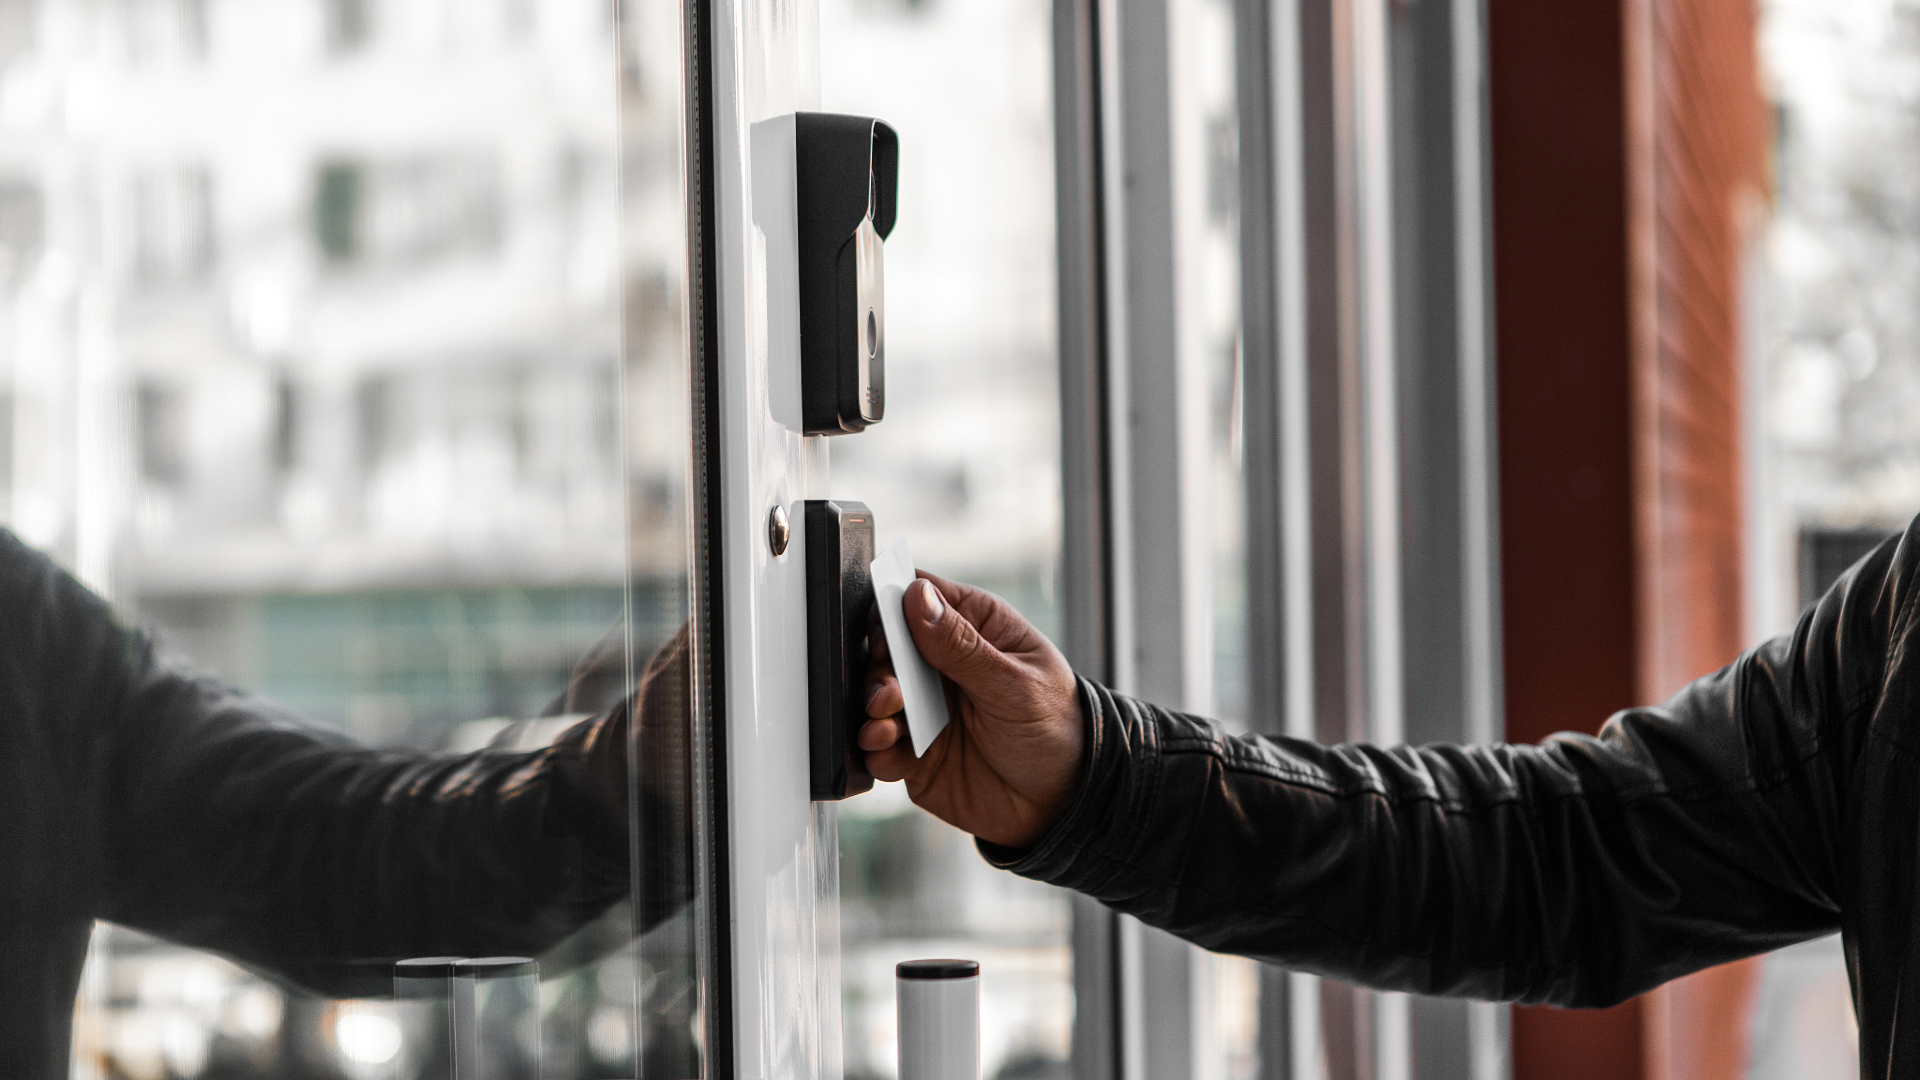 PHOENIX OFFICE SPACE SECURITY: PROTECTING YOUR BUSINESS